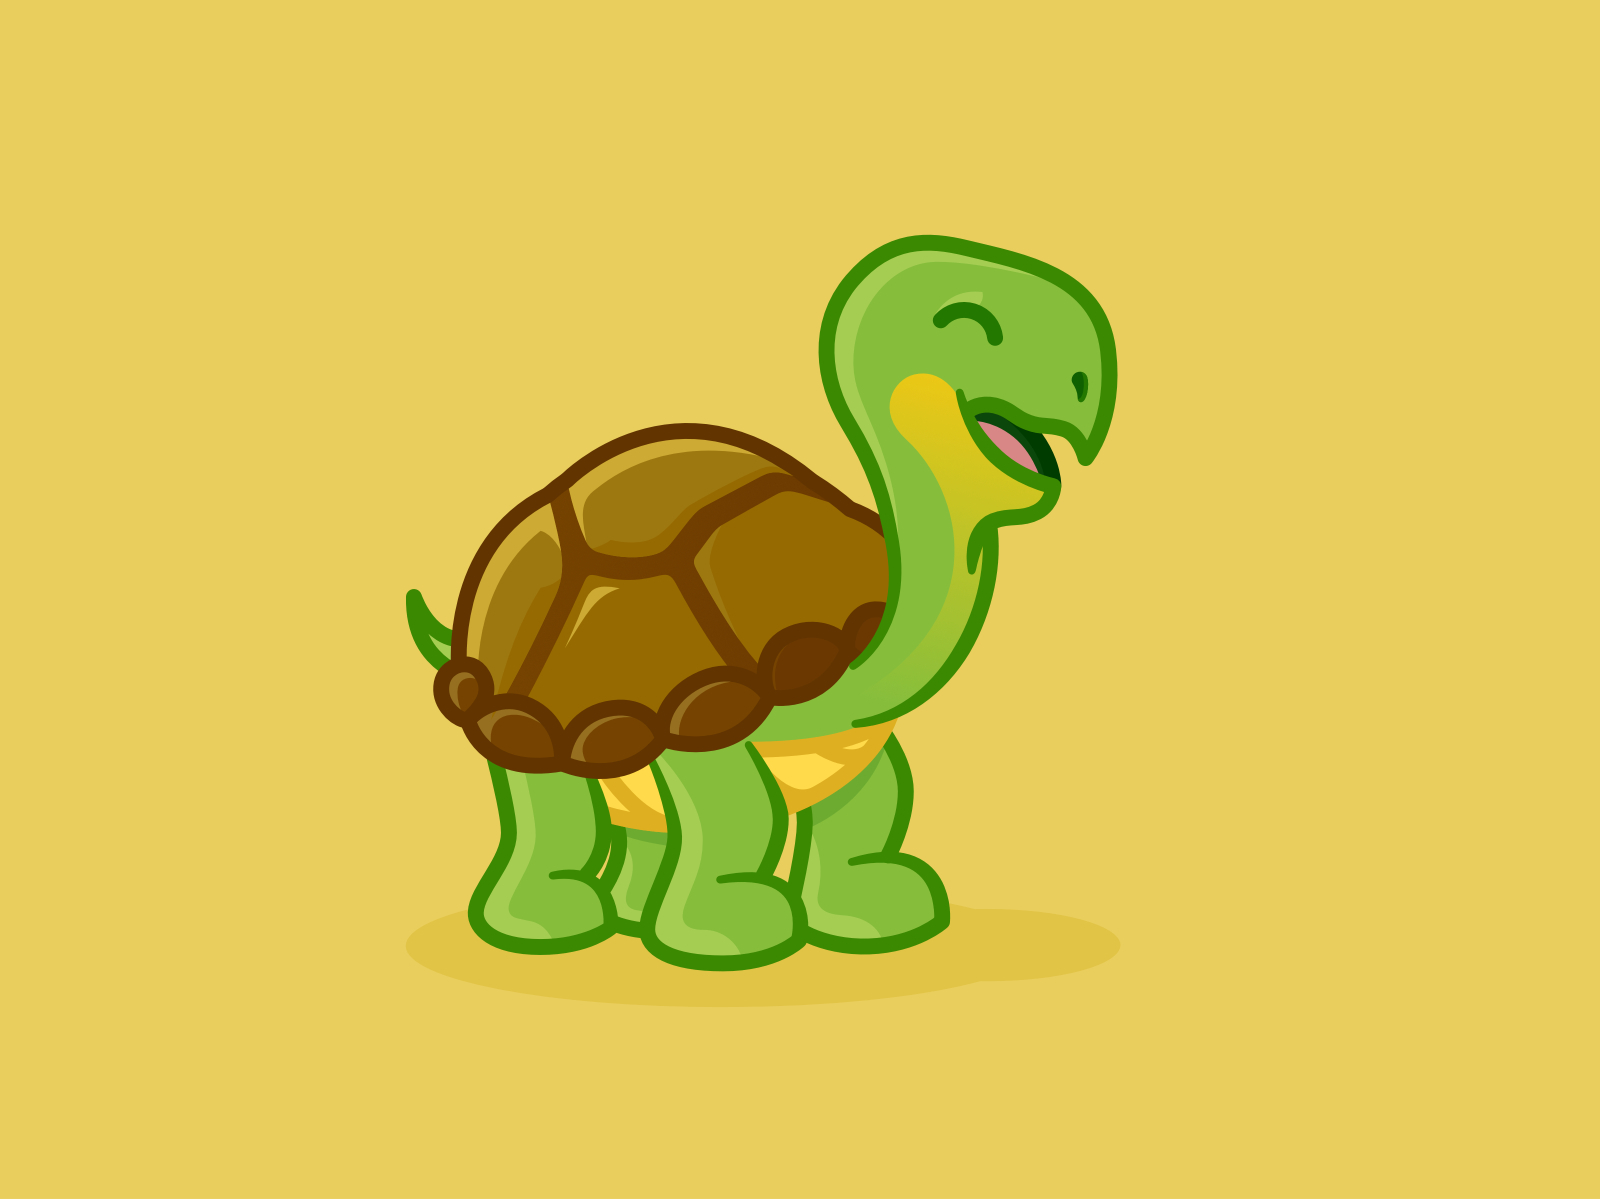 Turtle Illustration by Brady Leavell on Dribbble